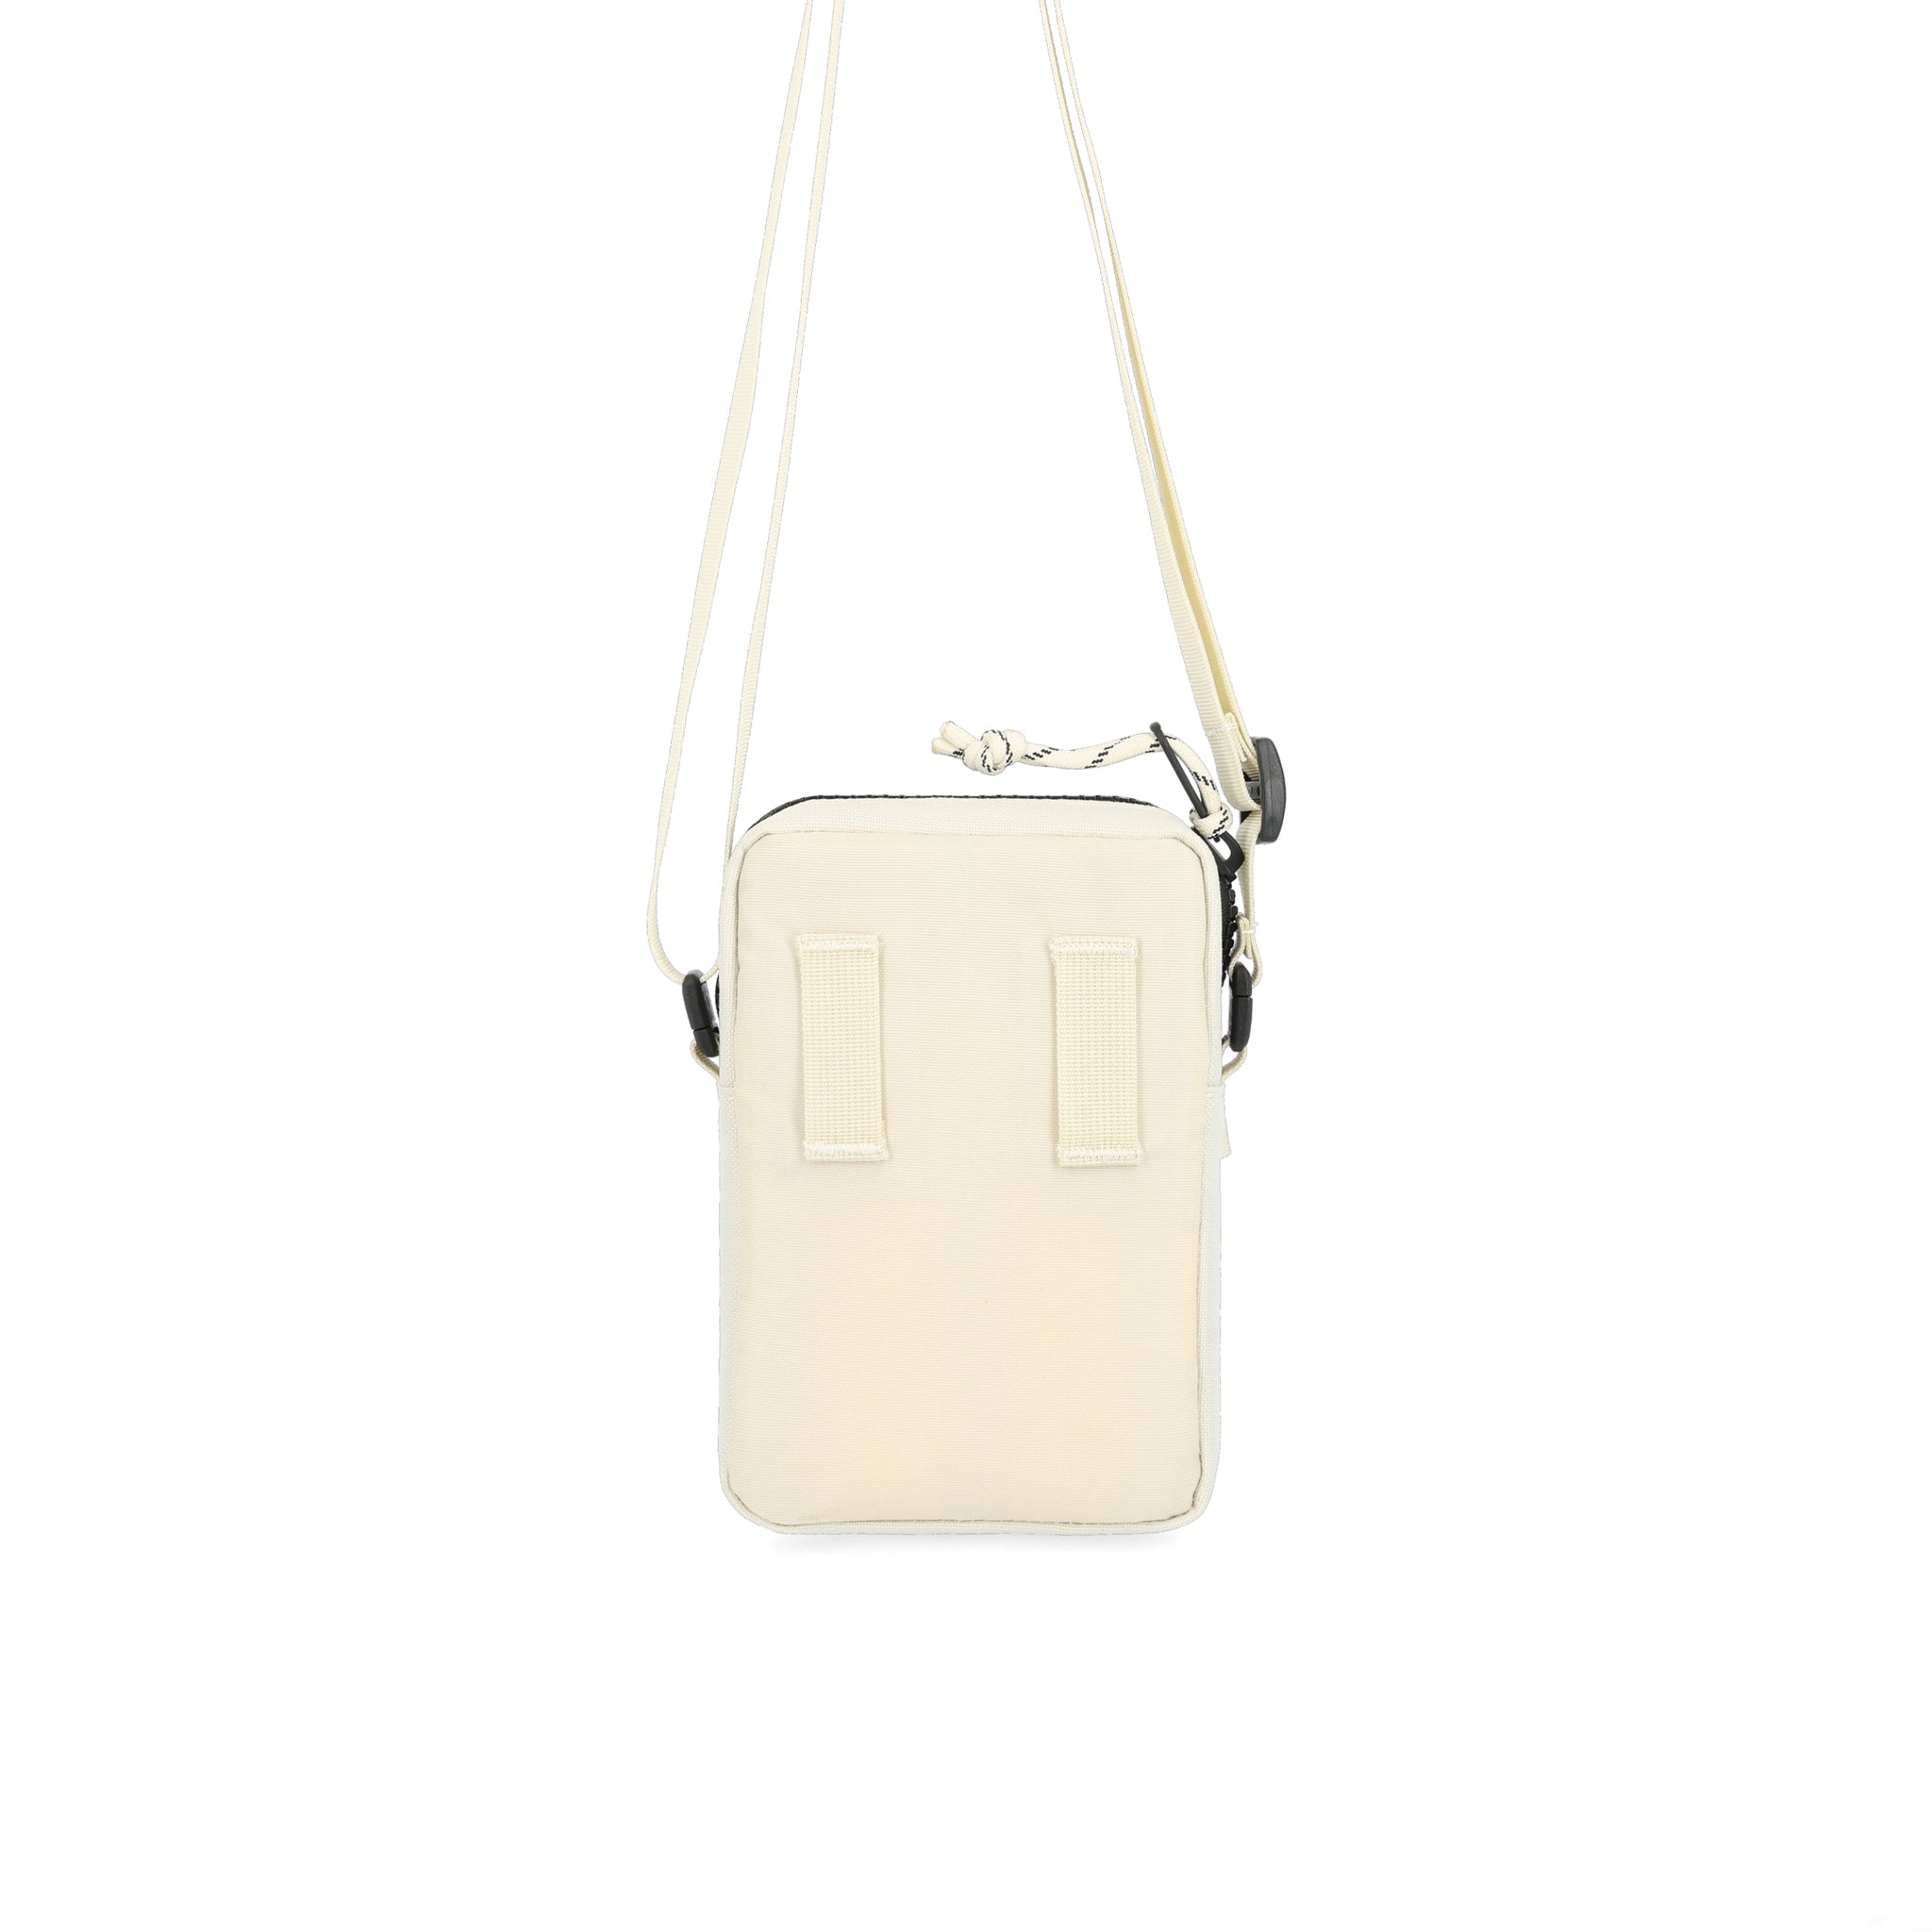 SHOULDER BAG MINI｜Planning and development, manufacturing and